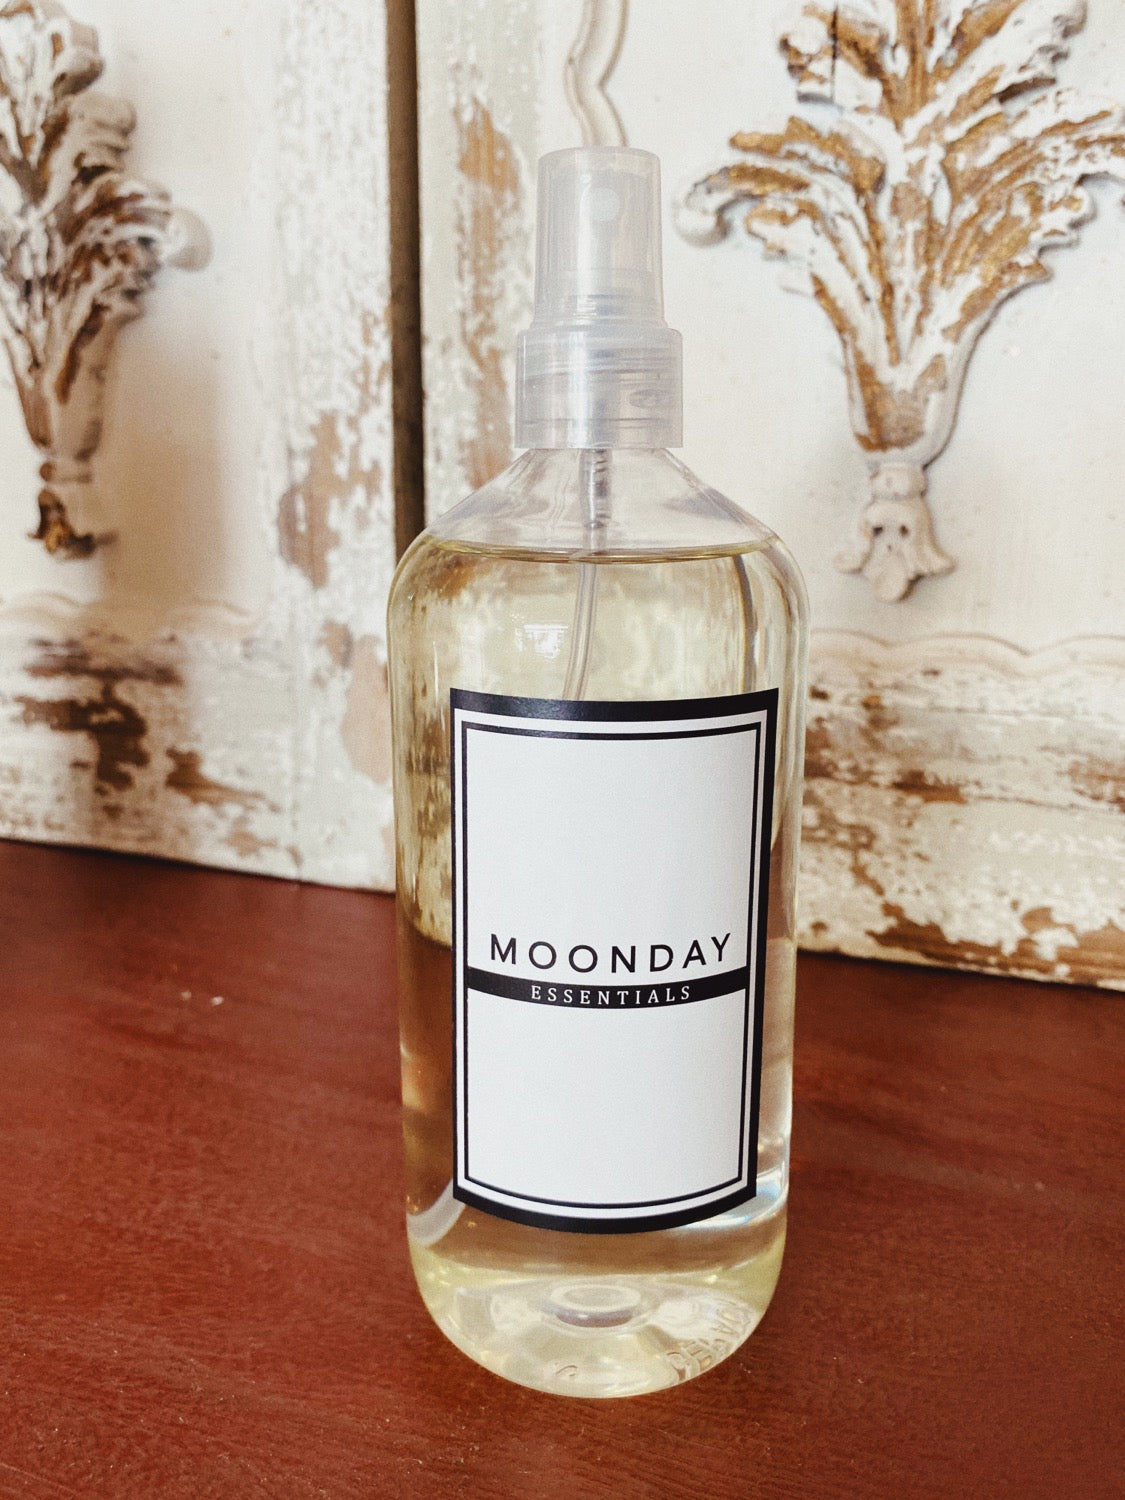 Moonday essential home perfume